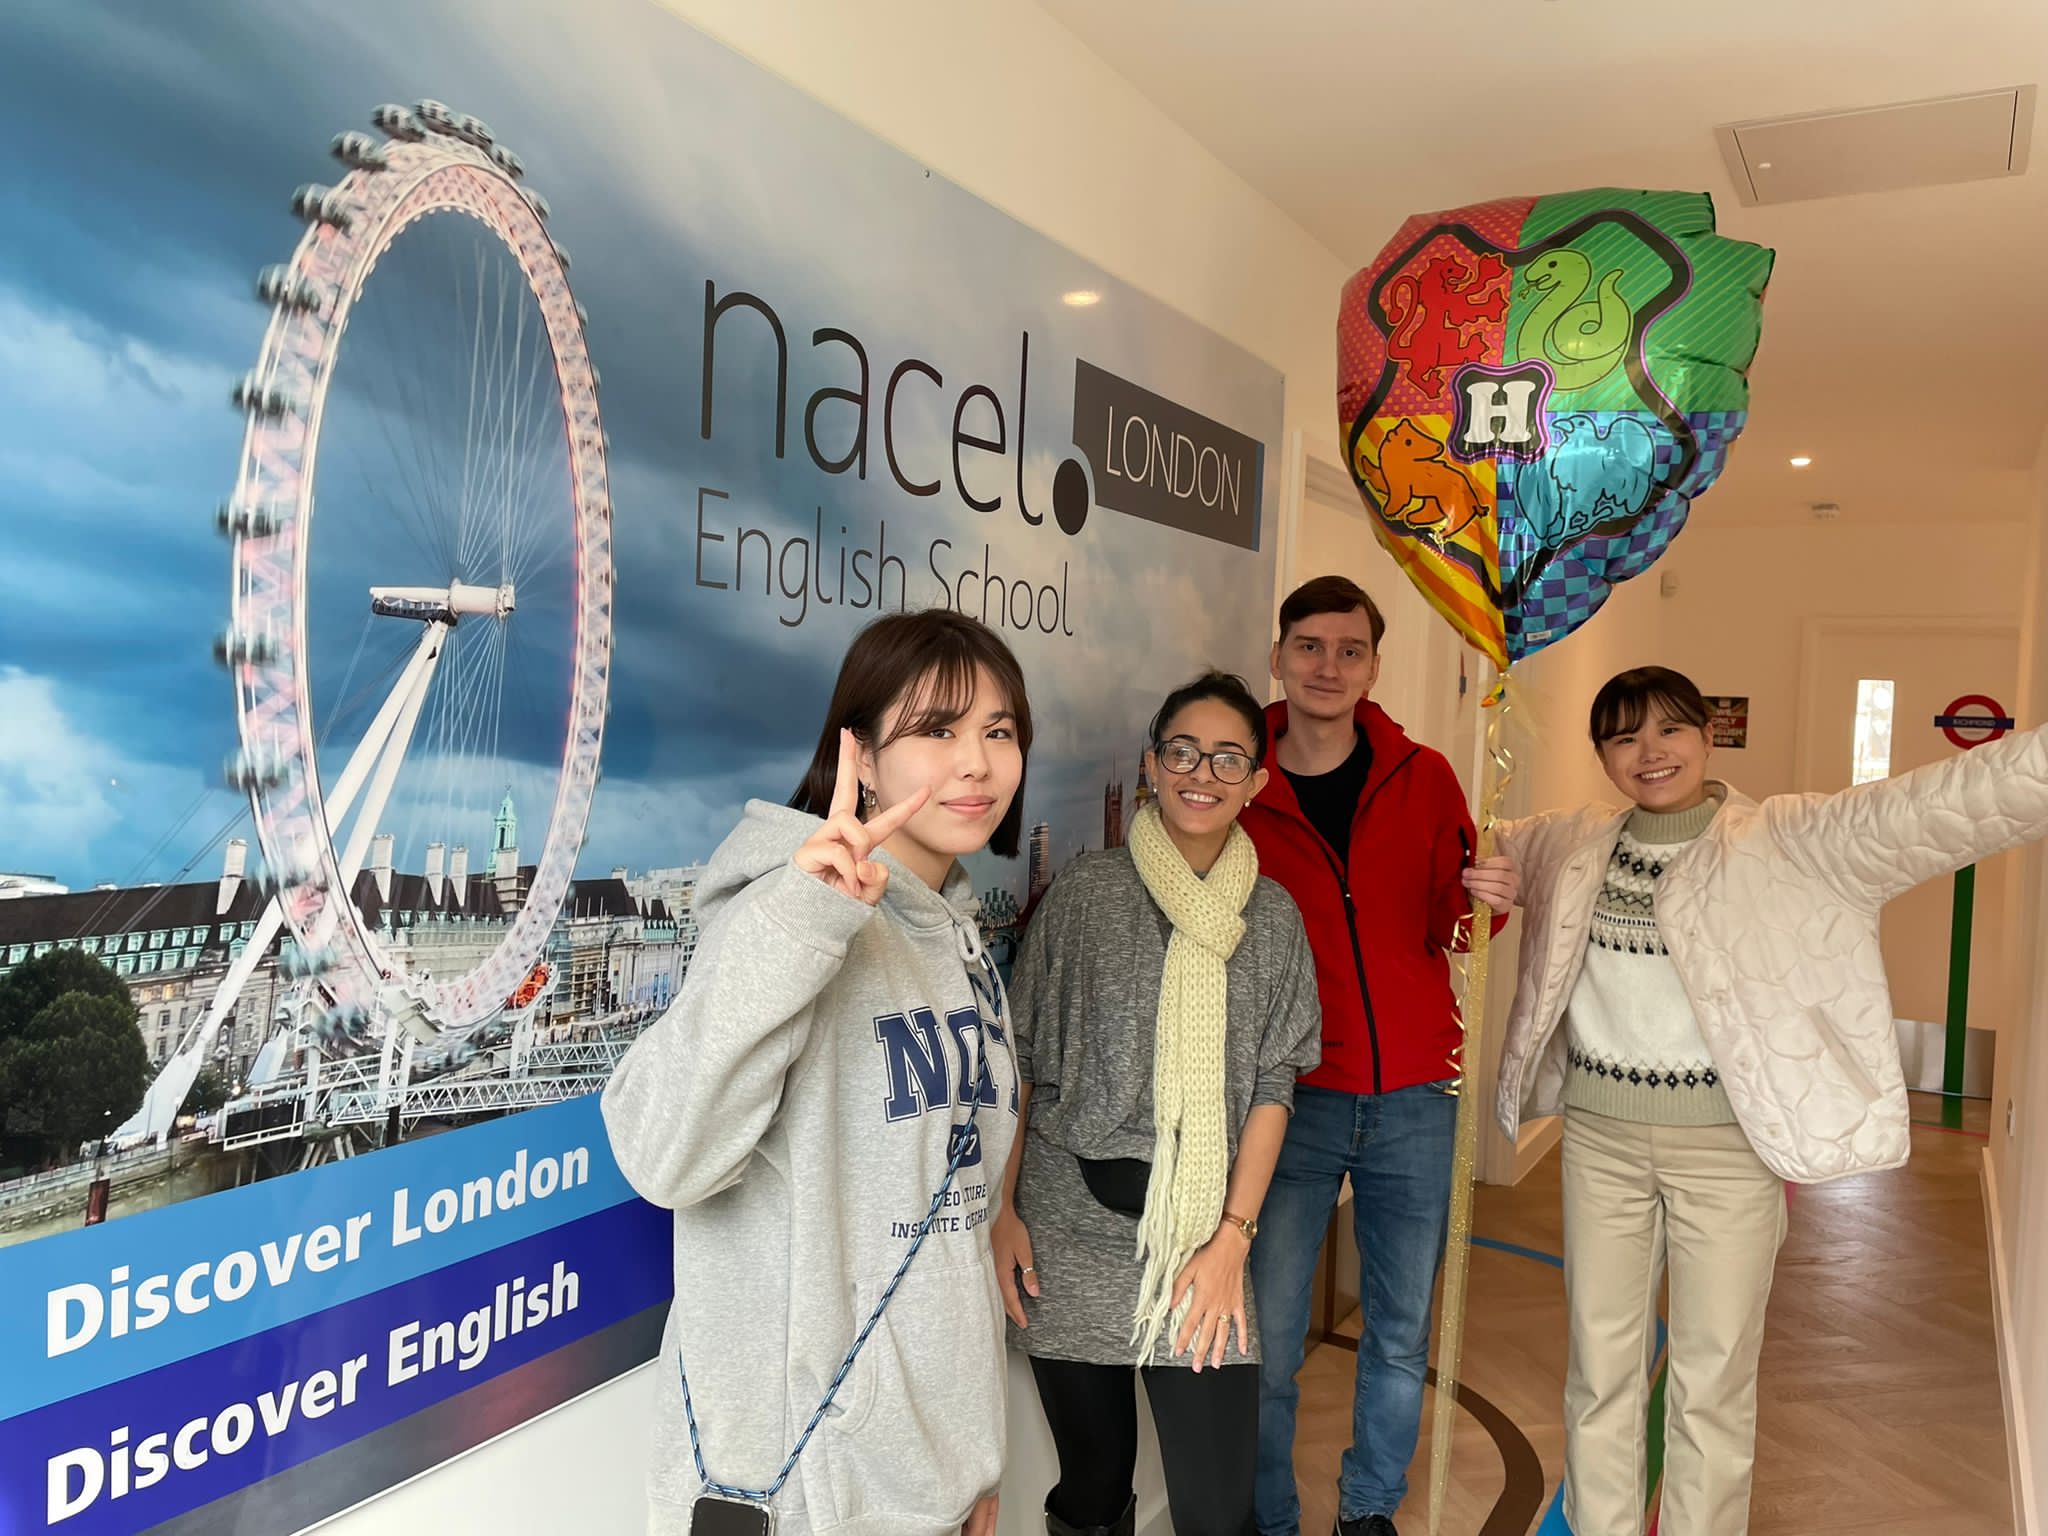 TOEFL and IELTS tests - prepare your English test at Nacel English School London